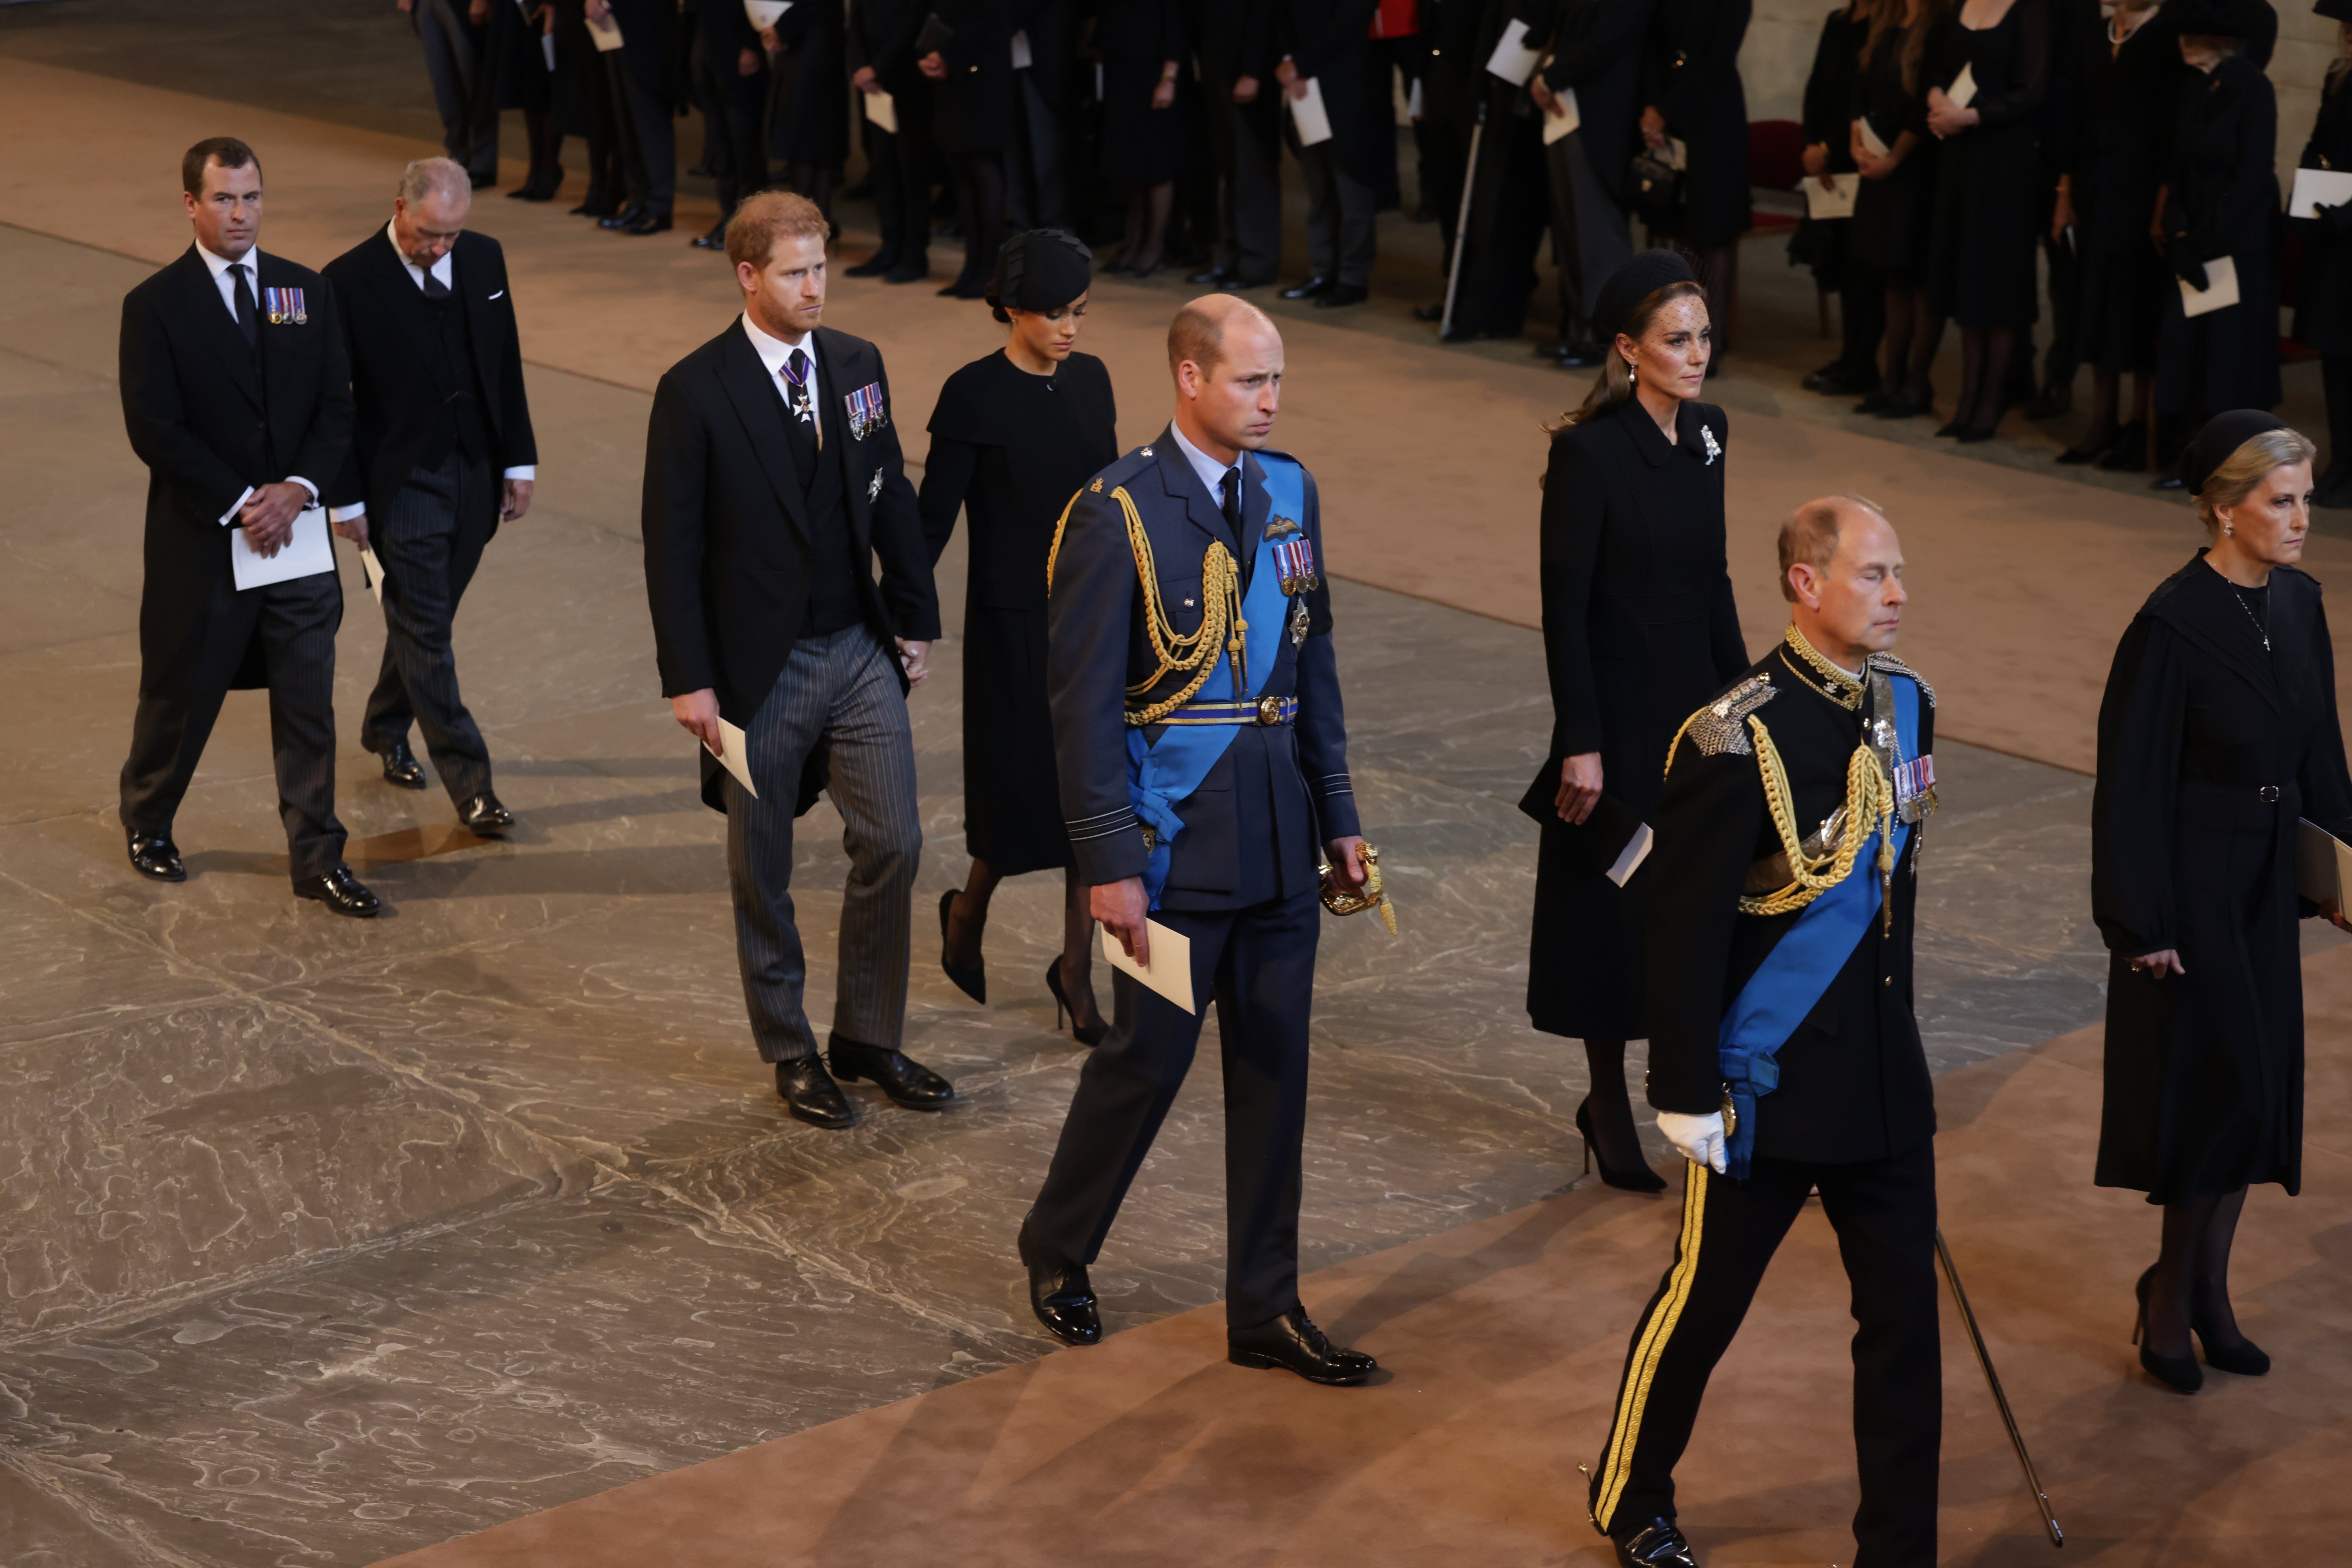 Peter Phillips, David Armstrong-Jones, Earl of Snowdon, Prince Harry, Duke of Sussex, Meghan, Duchess of Sussex, Prince William, Prince of Wales, Catherine, Princess of Wales, Edward, Earl of Wessex and Sophie, Countess of Wessex leave Westminster Hall on September 14, 2022 in London, United Kingdom | Source: Getty Images 